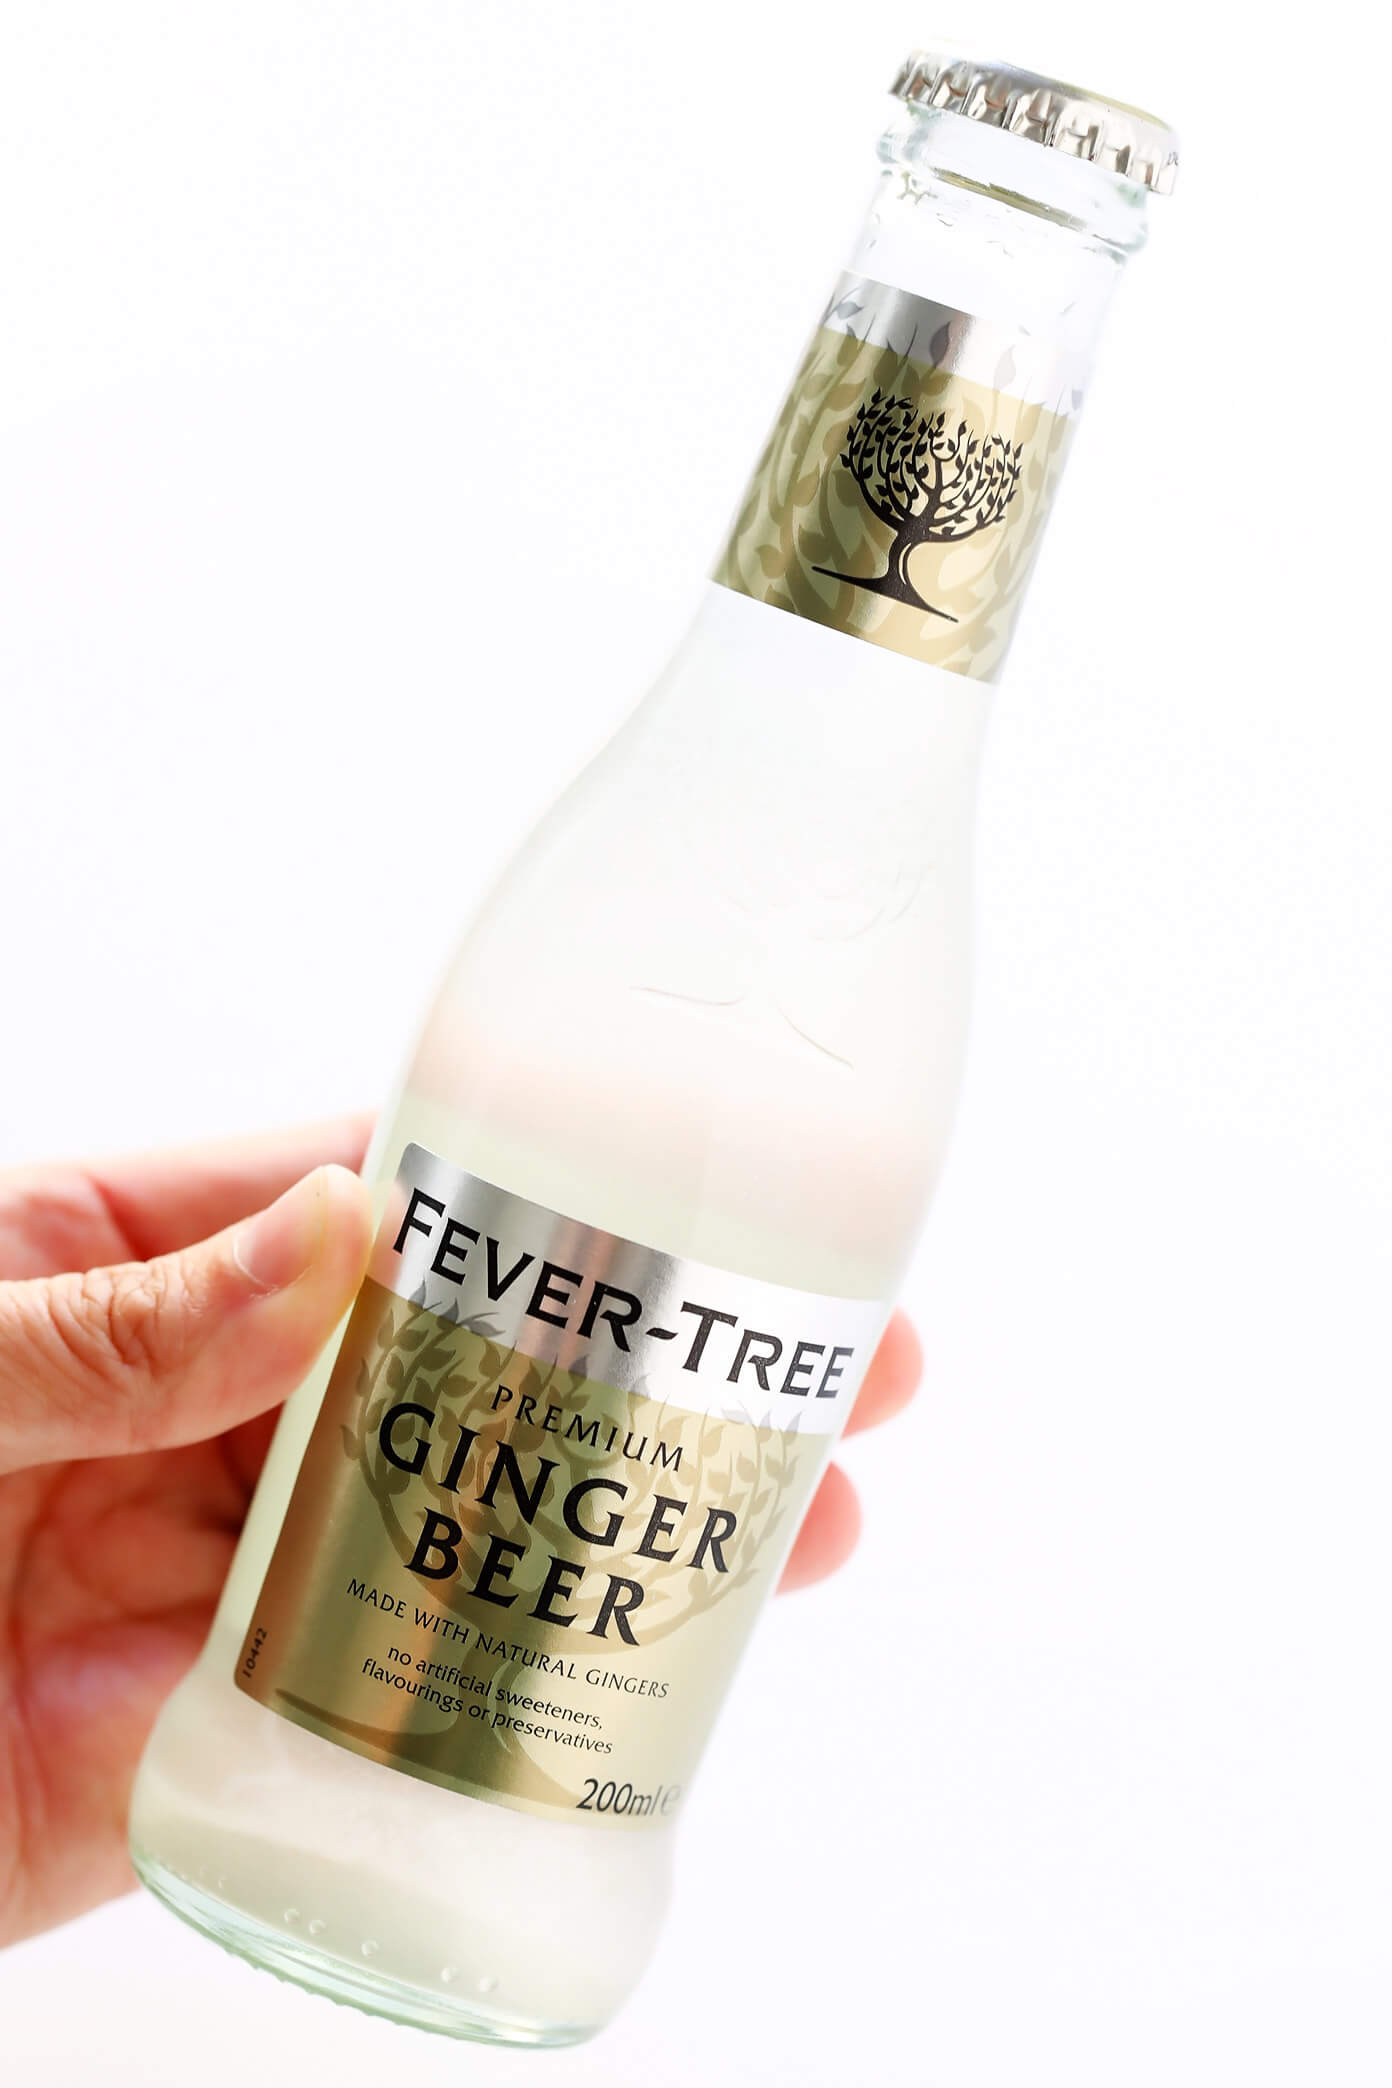 Fever Tree ginger beer is perfect for a Moscow Mule recipe!